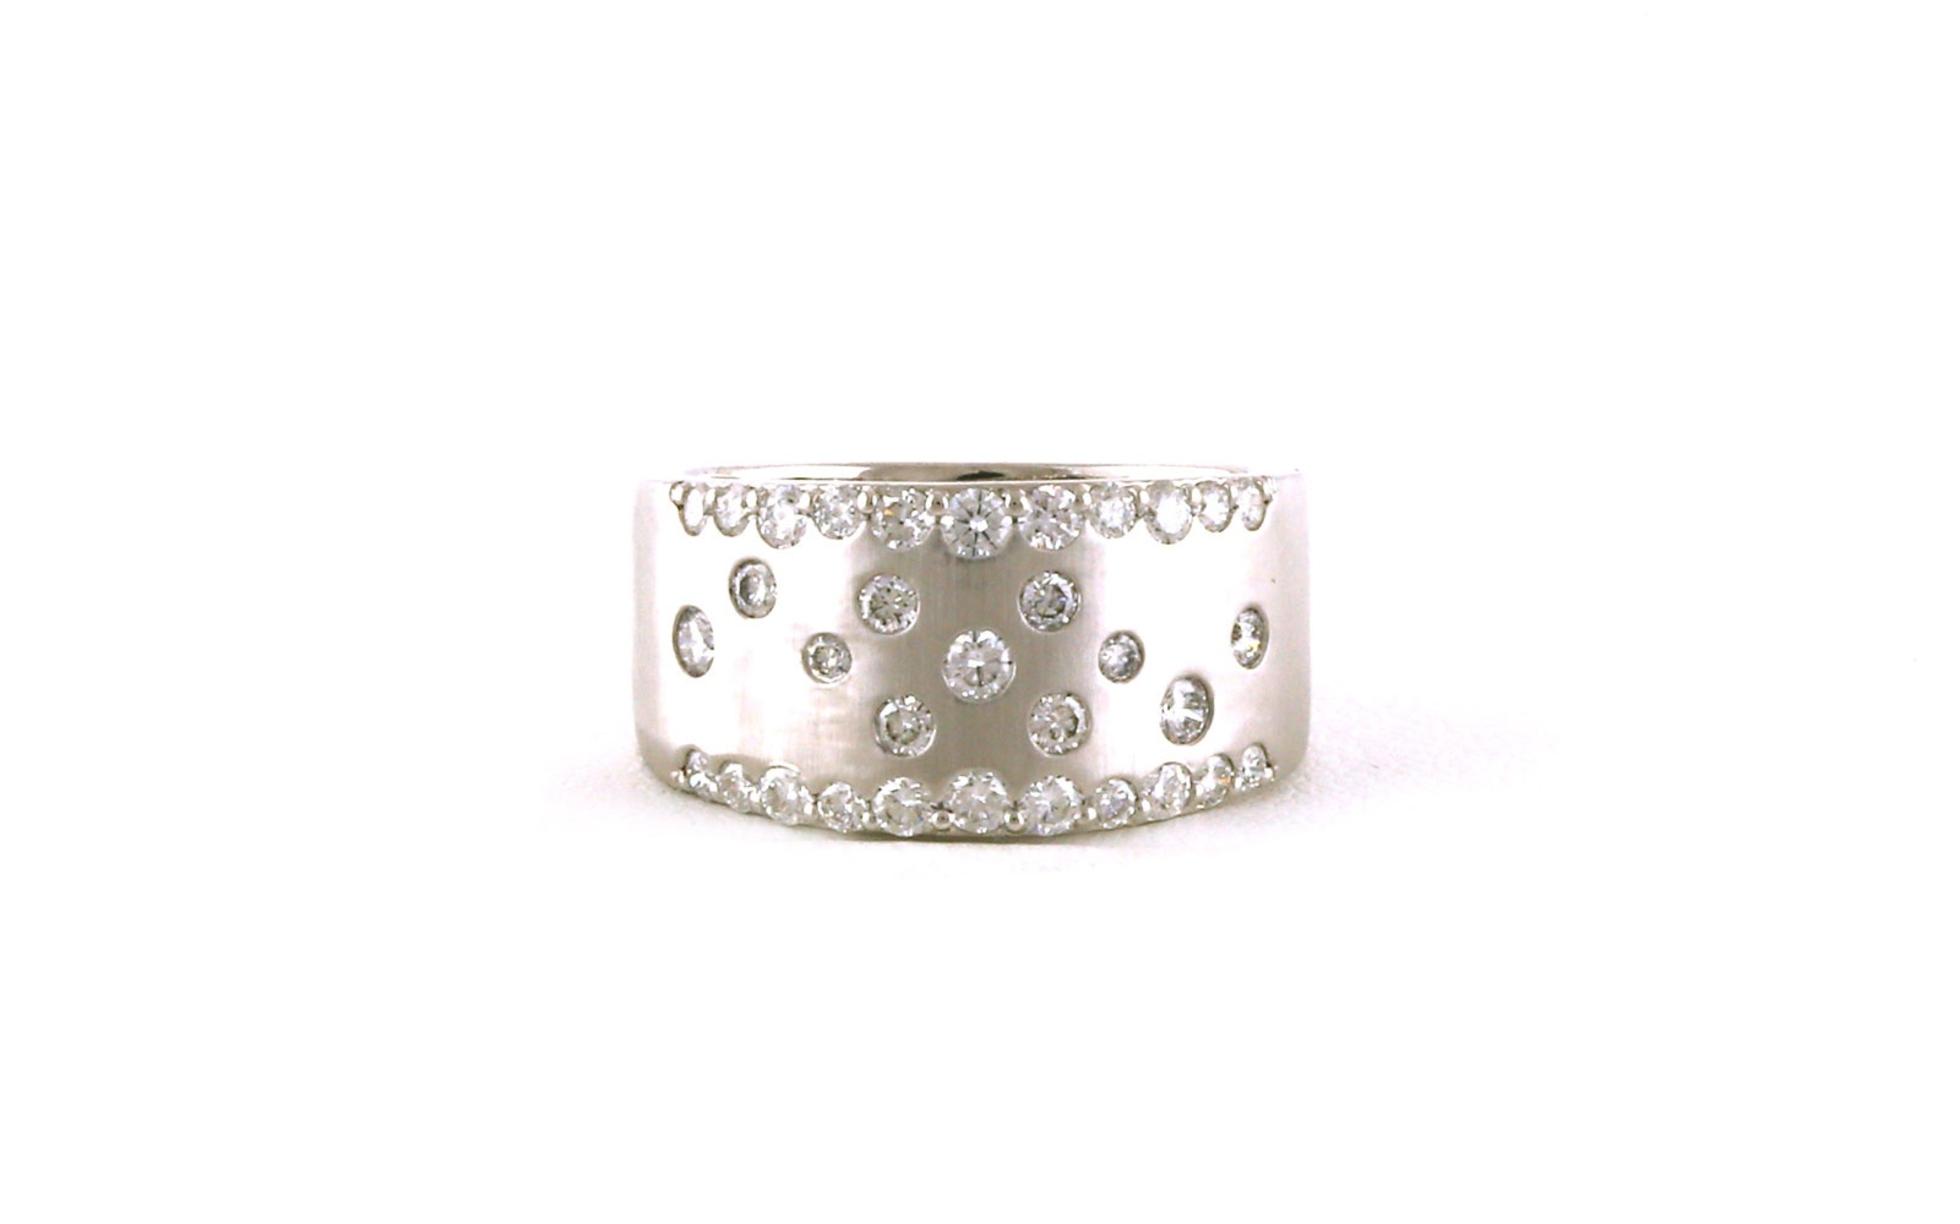 Wide Scattered Pattern Flush-set Diamond Ring with Satin Finish in White Gold (0.83cts TWT)